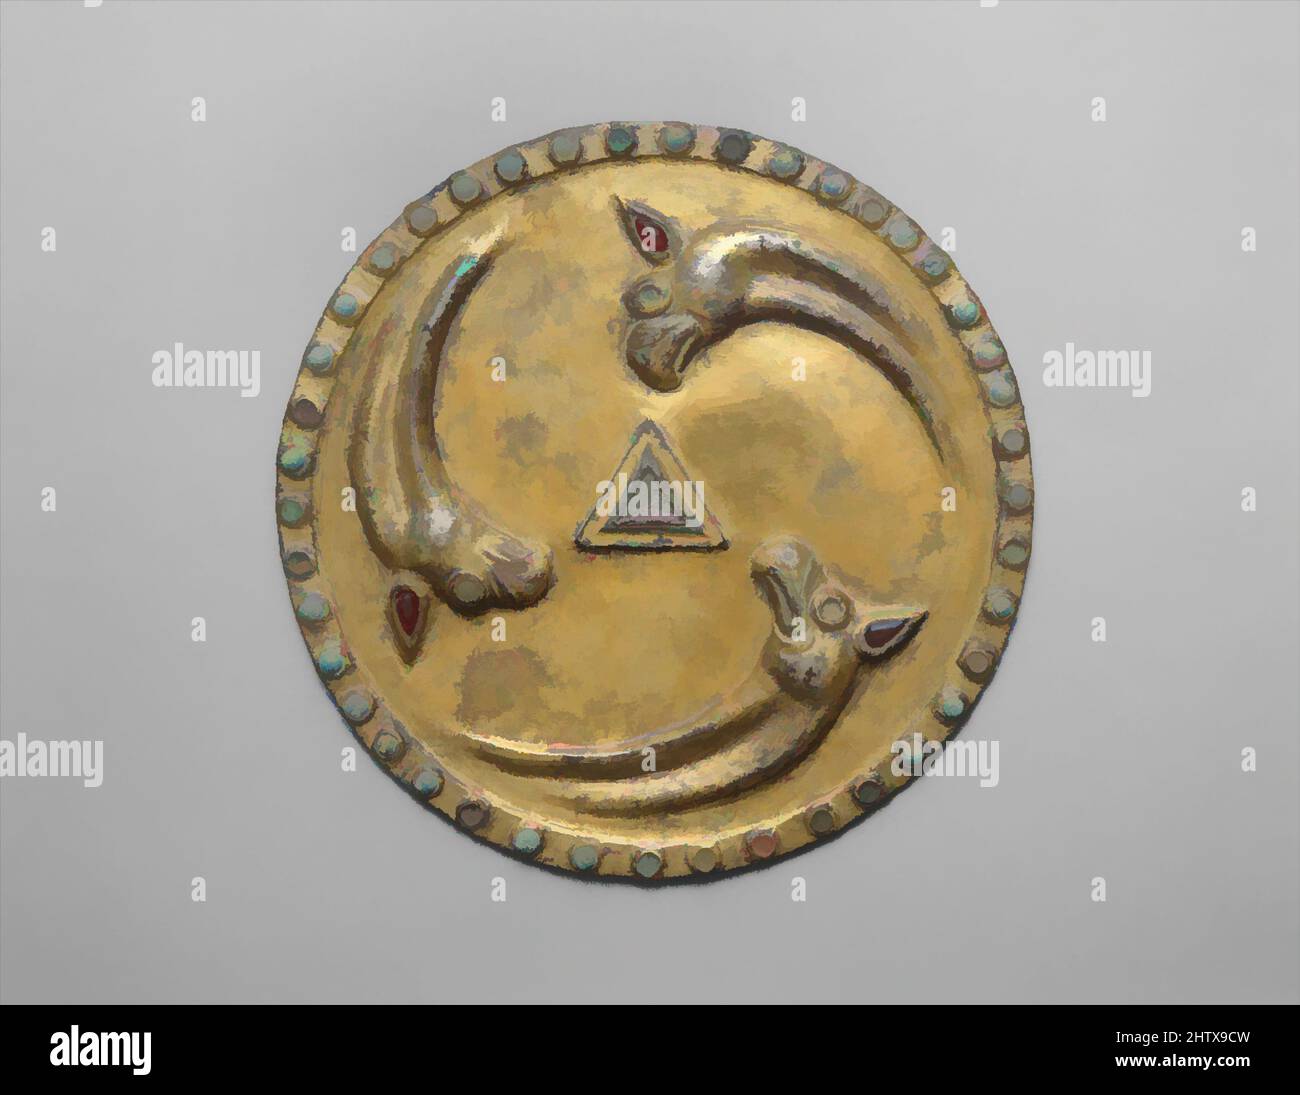 Art inspired by Roundel with griffin heads, ca. 1st–2nd century, Eurasian steppes, Sarmatian, Silver, gilding, inlays, Diam. 5 7/8 in. (14.9 cm), Metalwork-Ornaments, Classic works modernized by Artotop with a splash of modernity. Shapes, color and value, eye-catching visual impact on art. Emotions through freedom of artworks in a contemporary way. A timeless message pursuing a wildly creative new direction. Artists turning to the digital medium and creating the Artotop NFT Stock Photo